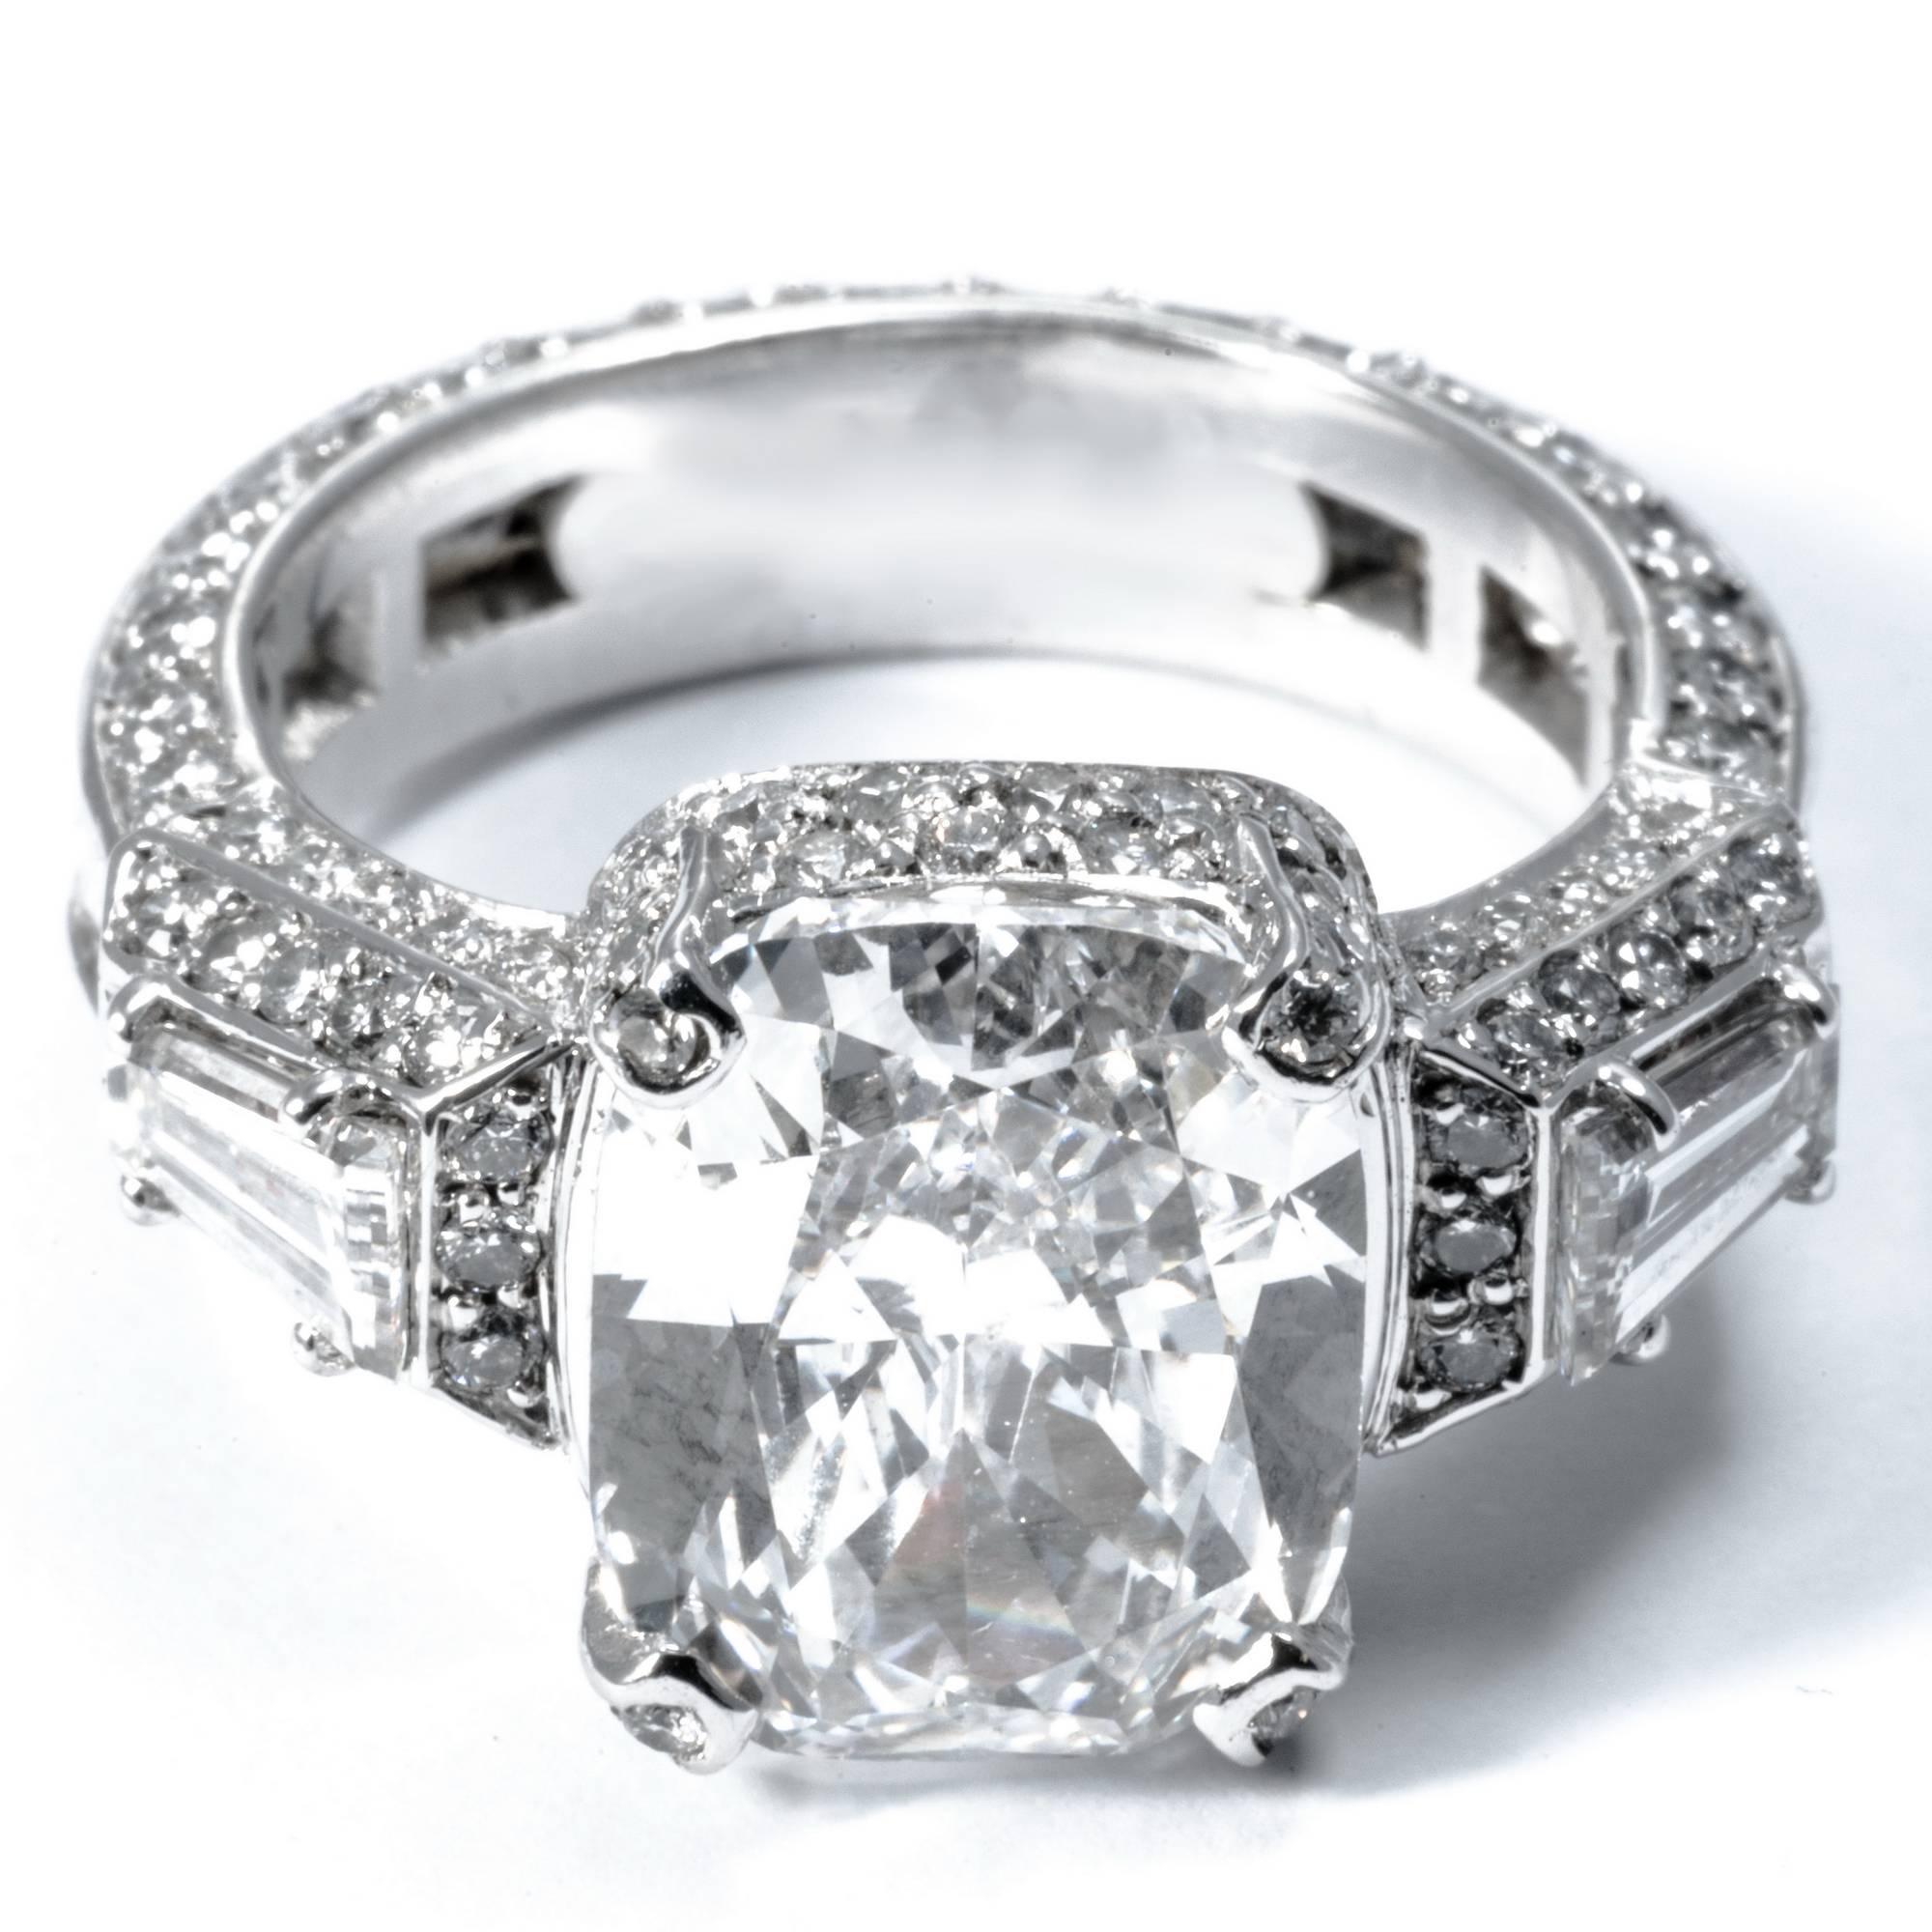 This statement  ring band is the perfect choice for diamond lovers. This rare and beautiful solitaire diamond is a cushion cut of 3.80 carats, E color.  Set in white gold 18k, the band is fully decorated with 124 extra white diamonds, featuring 2